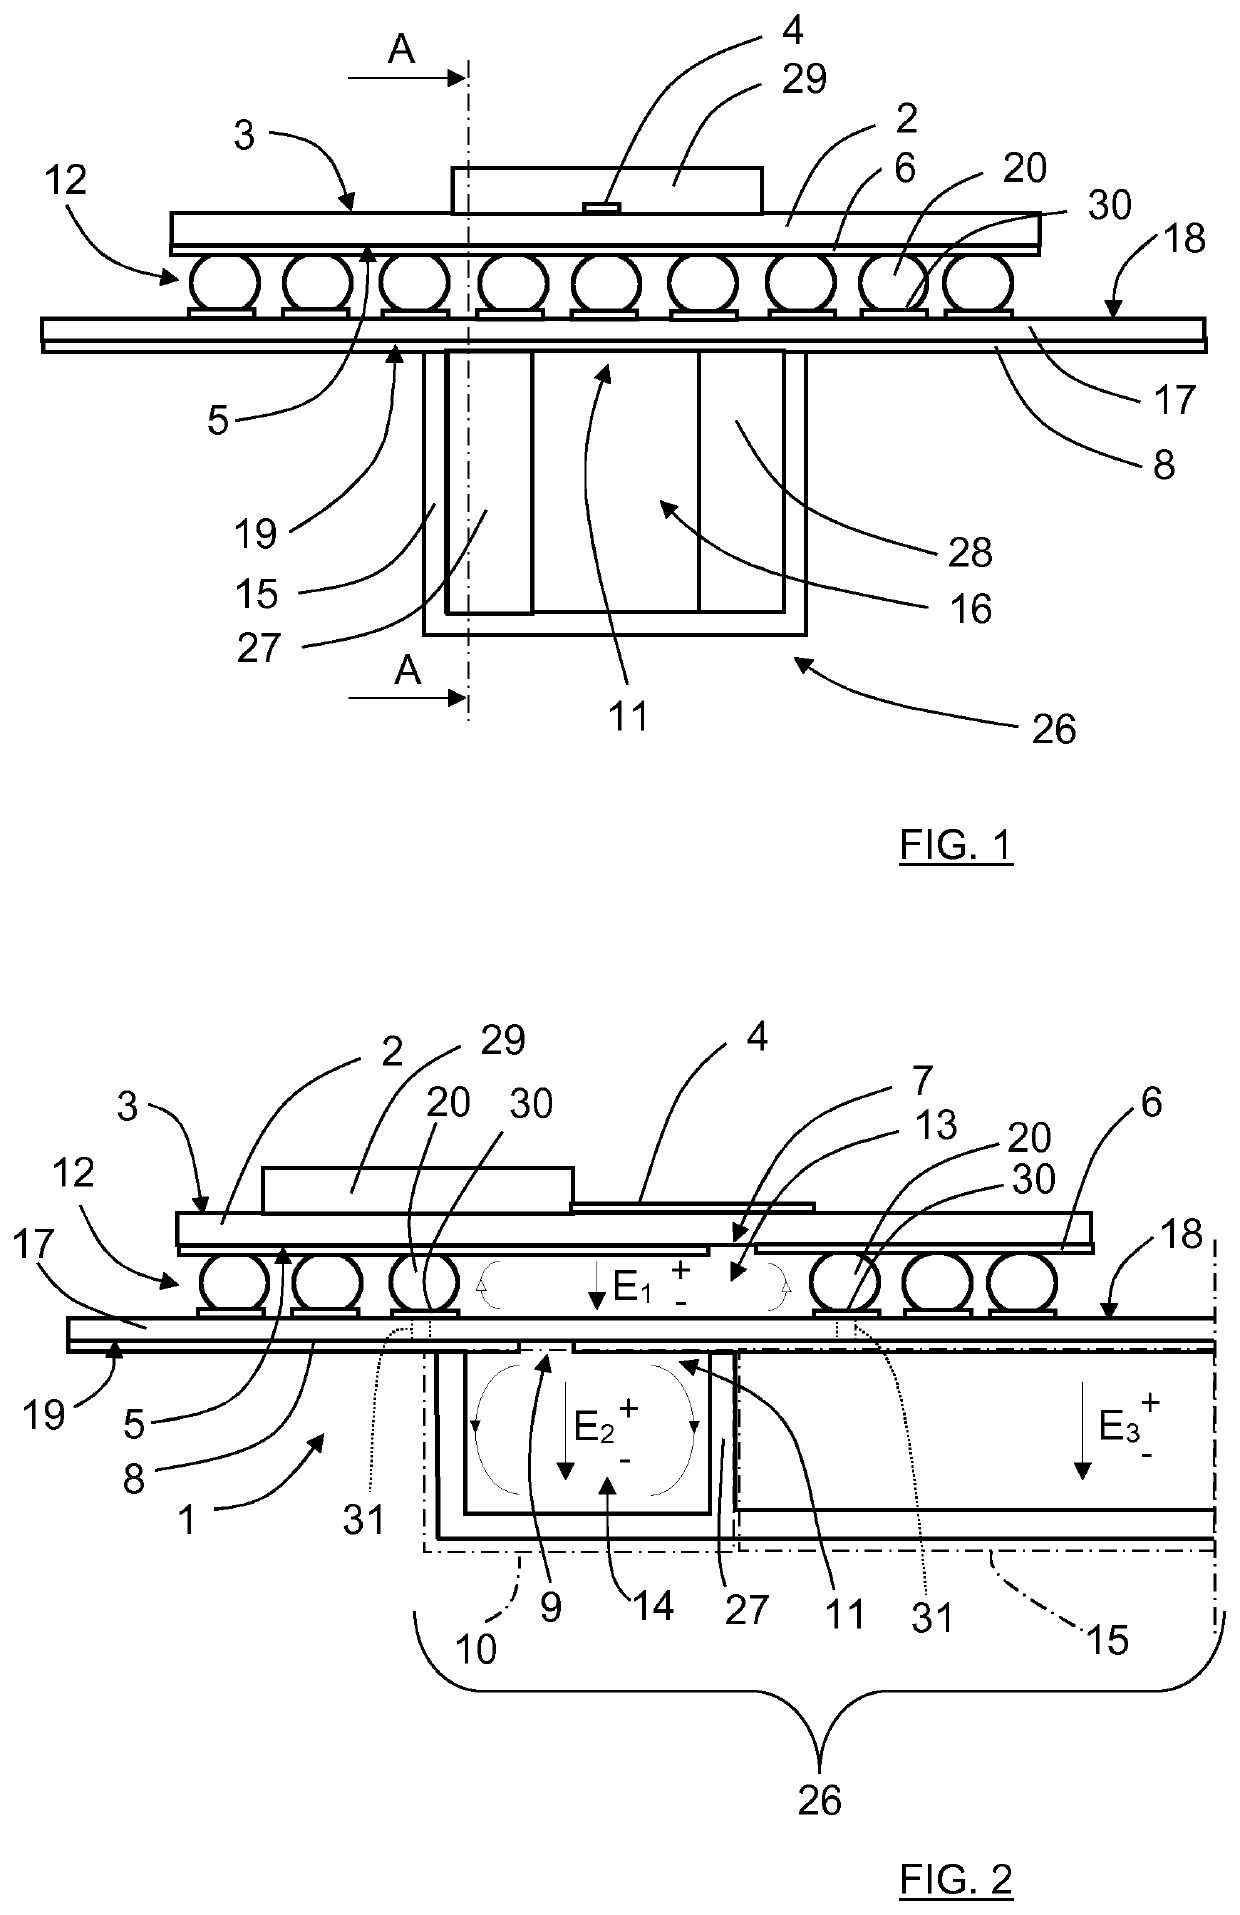 Waveguide transition comprising a feed probe coupled to a waveguide section through a waveguide resonator part